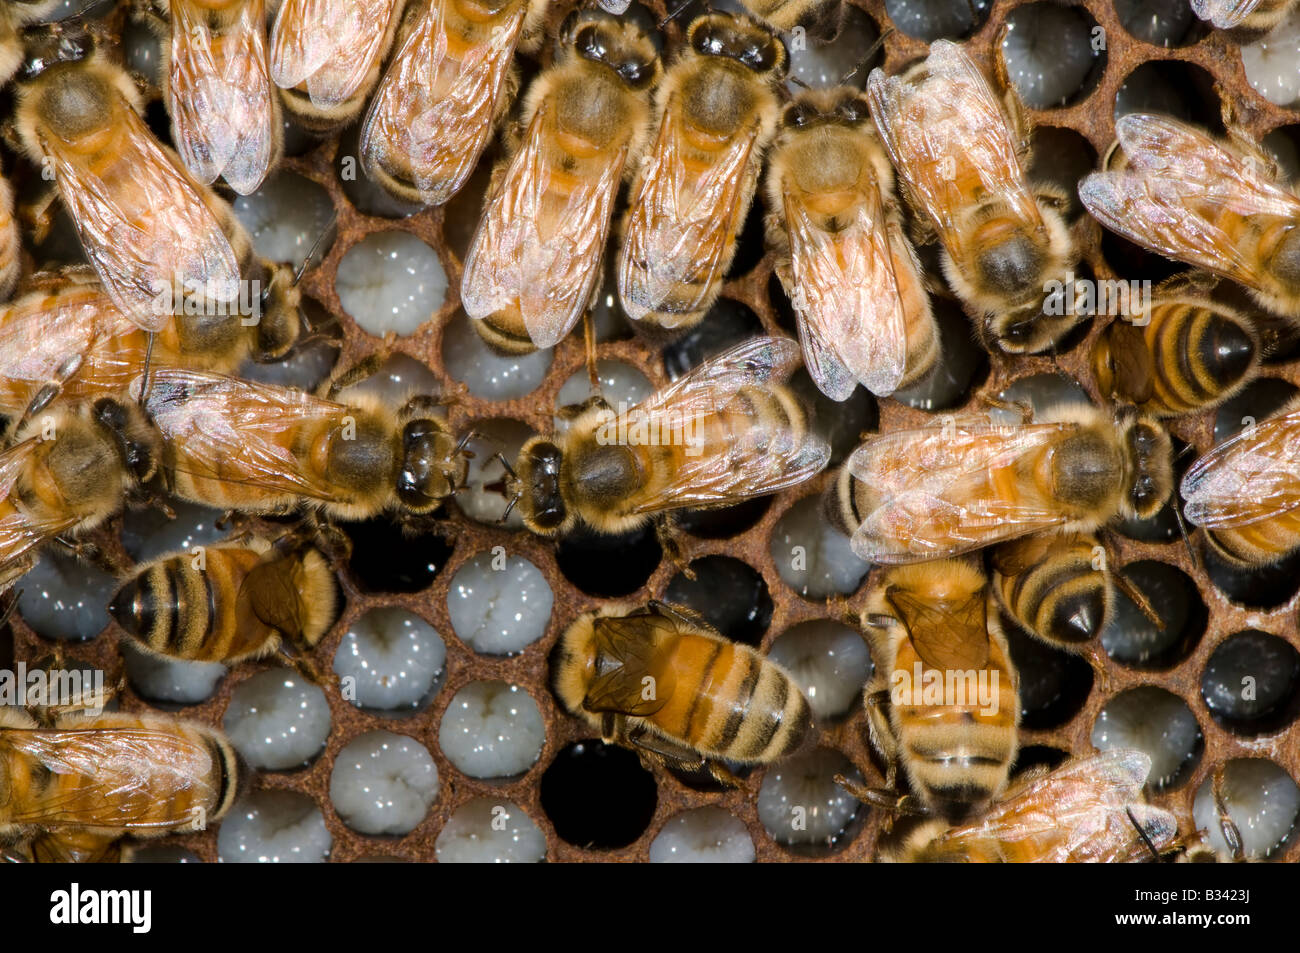 honeybees on comb within a bee hive Stock Photo